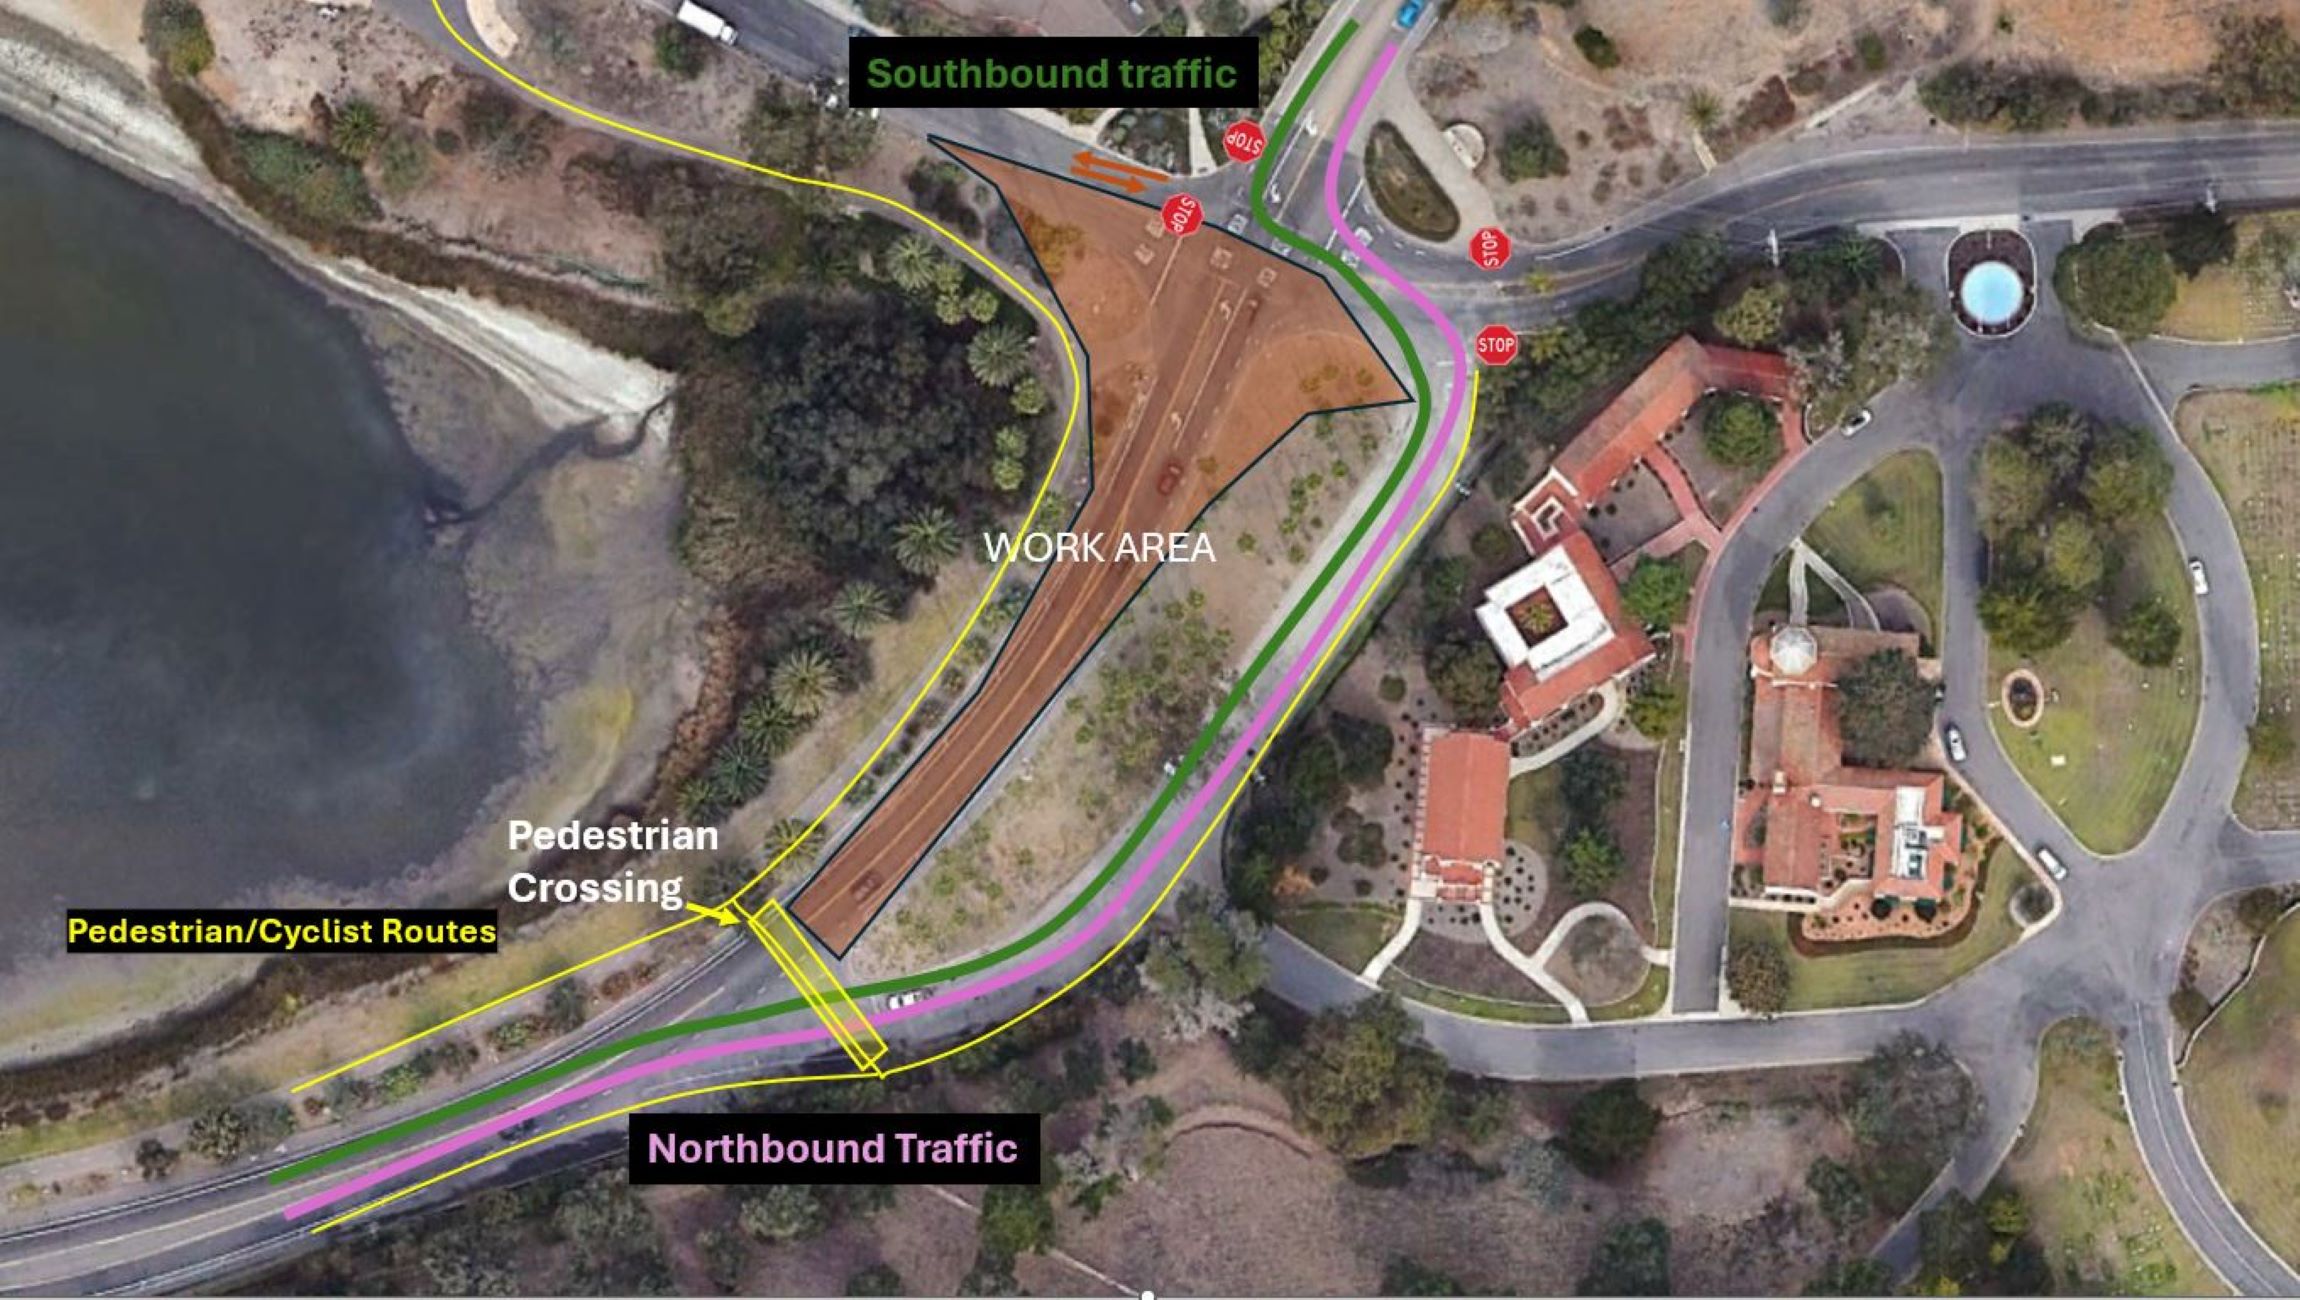 Cabrillo Boulevard Detour to Channel Drive Frontage for Roundabout Construction